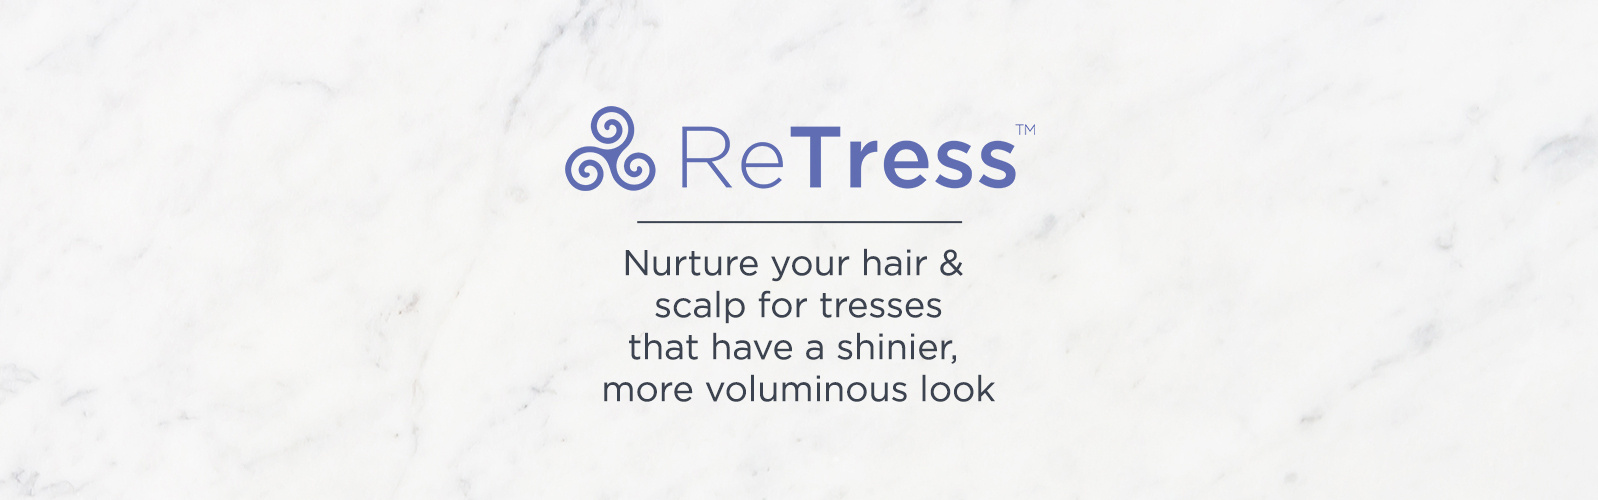 ReTress.  Nurture your hair & scalp for tresses that have a shinier, more voluminous look